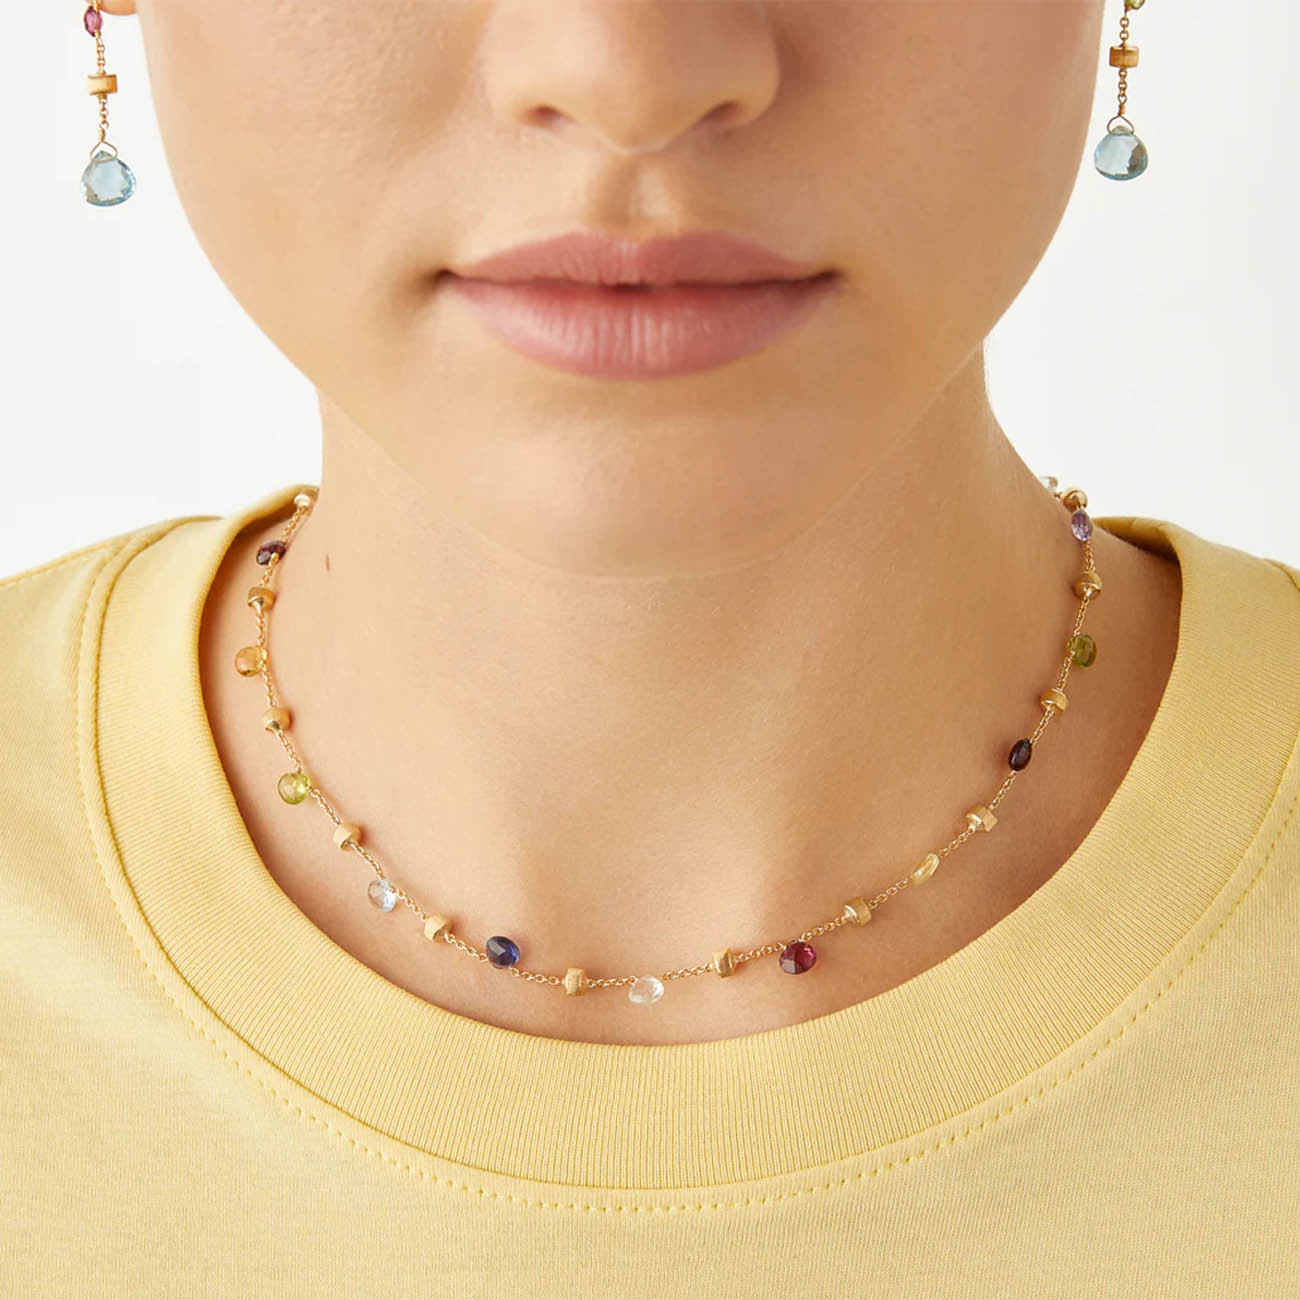 Marco Bicego Paradise 18kt Gold Necklace with Multi-Colored Gemstones Lifestyle Model